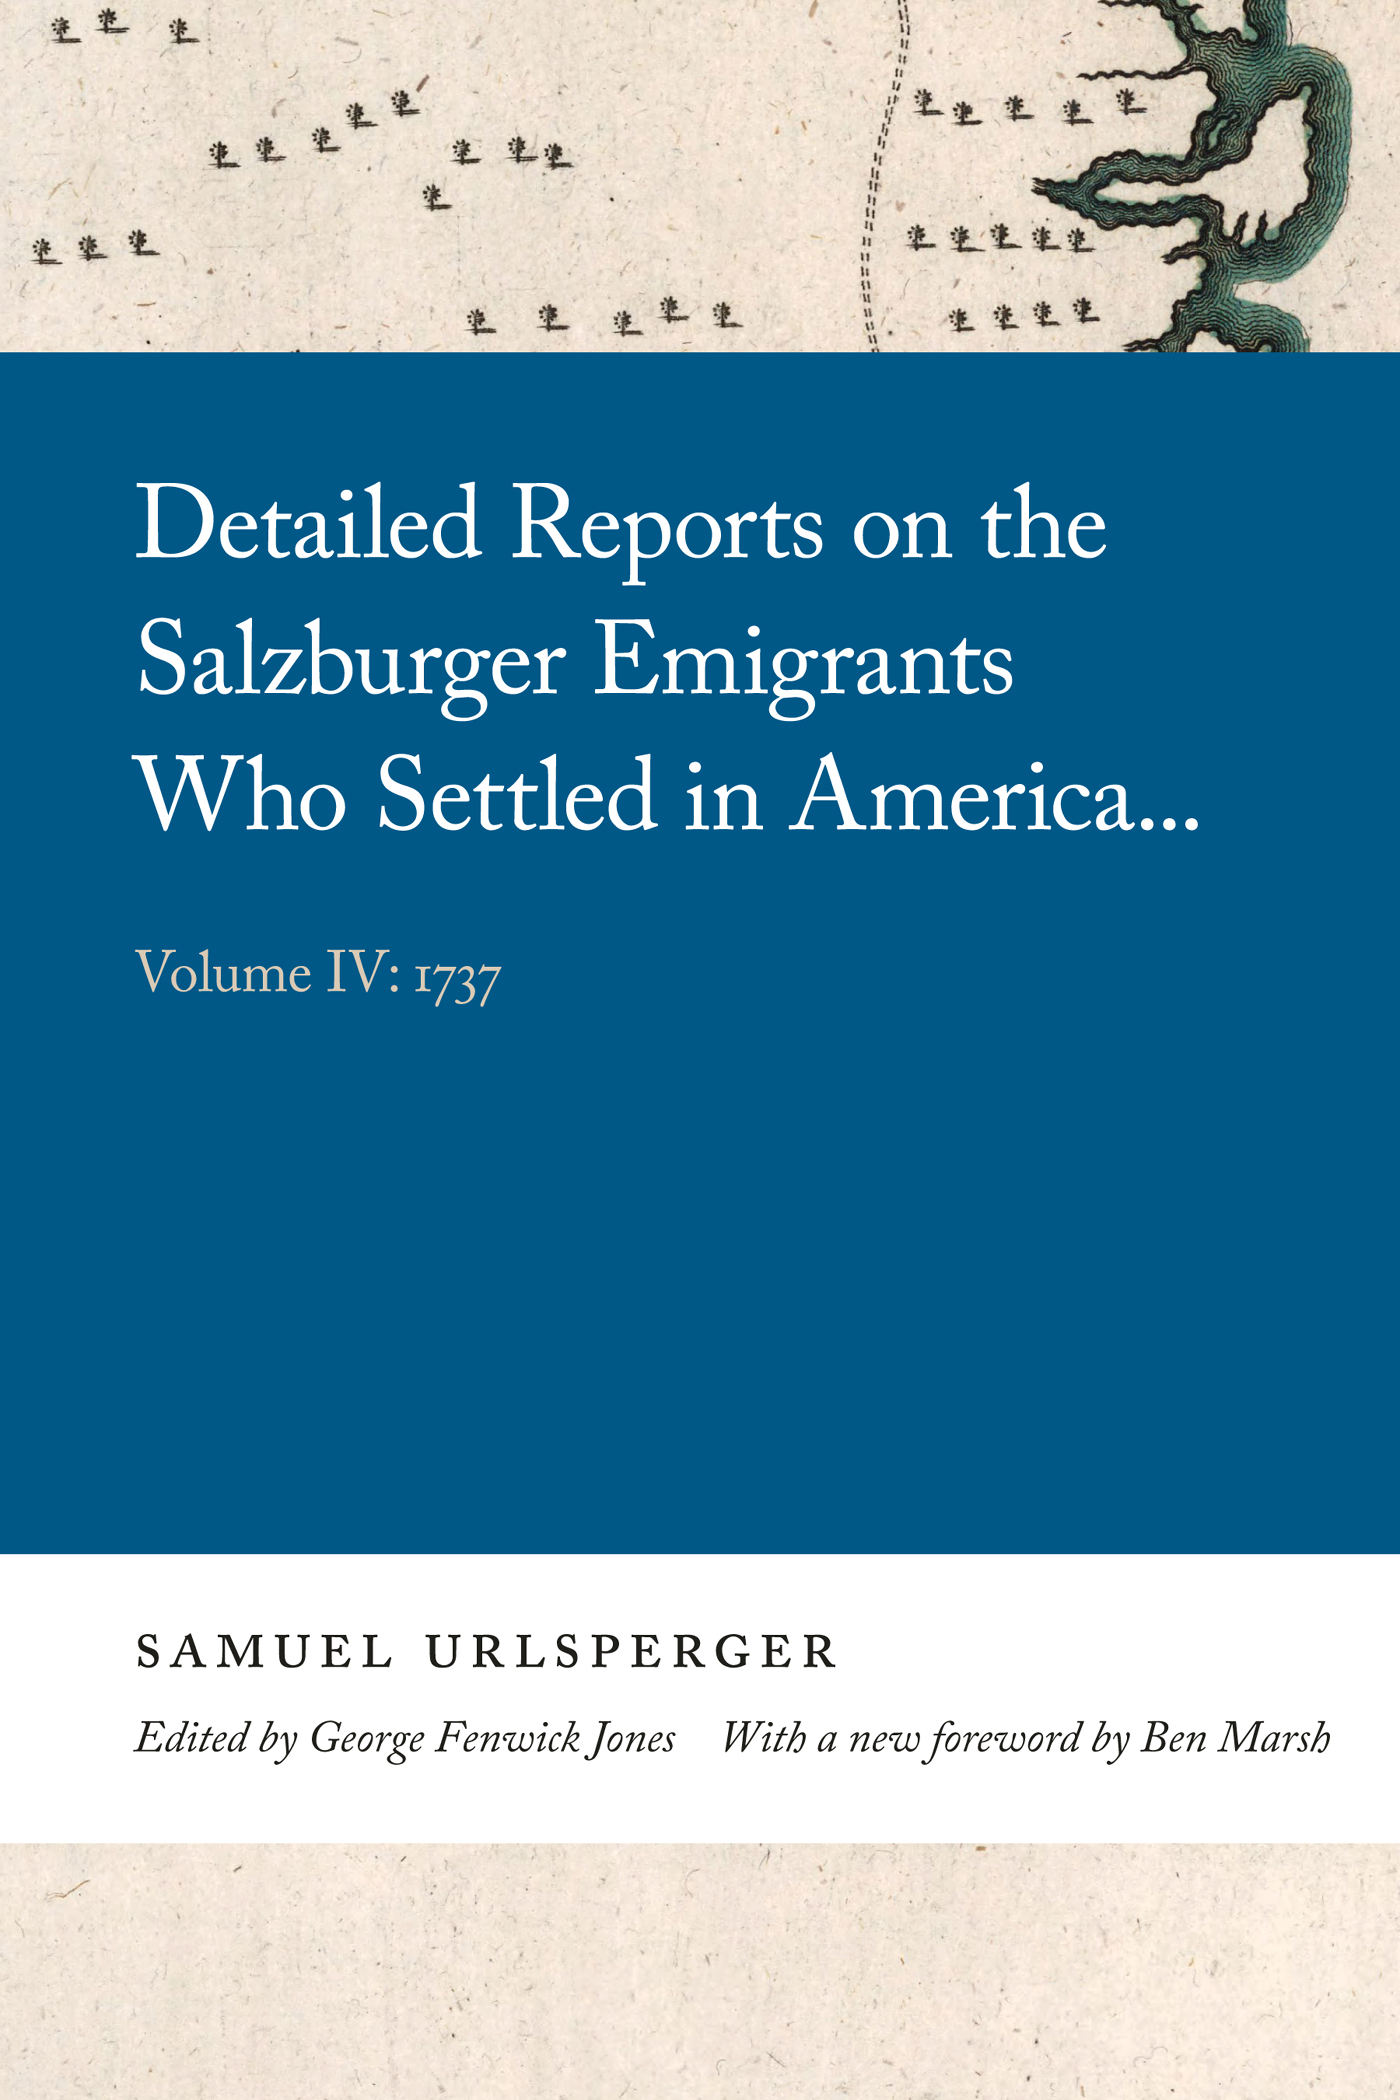 Cover page of the book “Detailed Reports on Salzburger Emigrants Who Settled in America, Volume 4.”